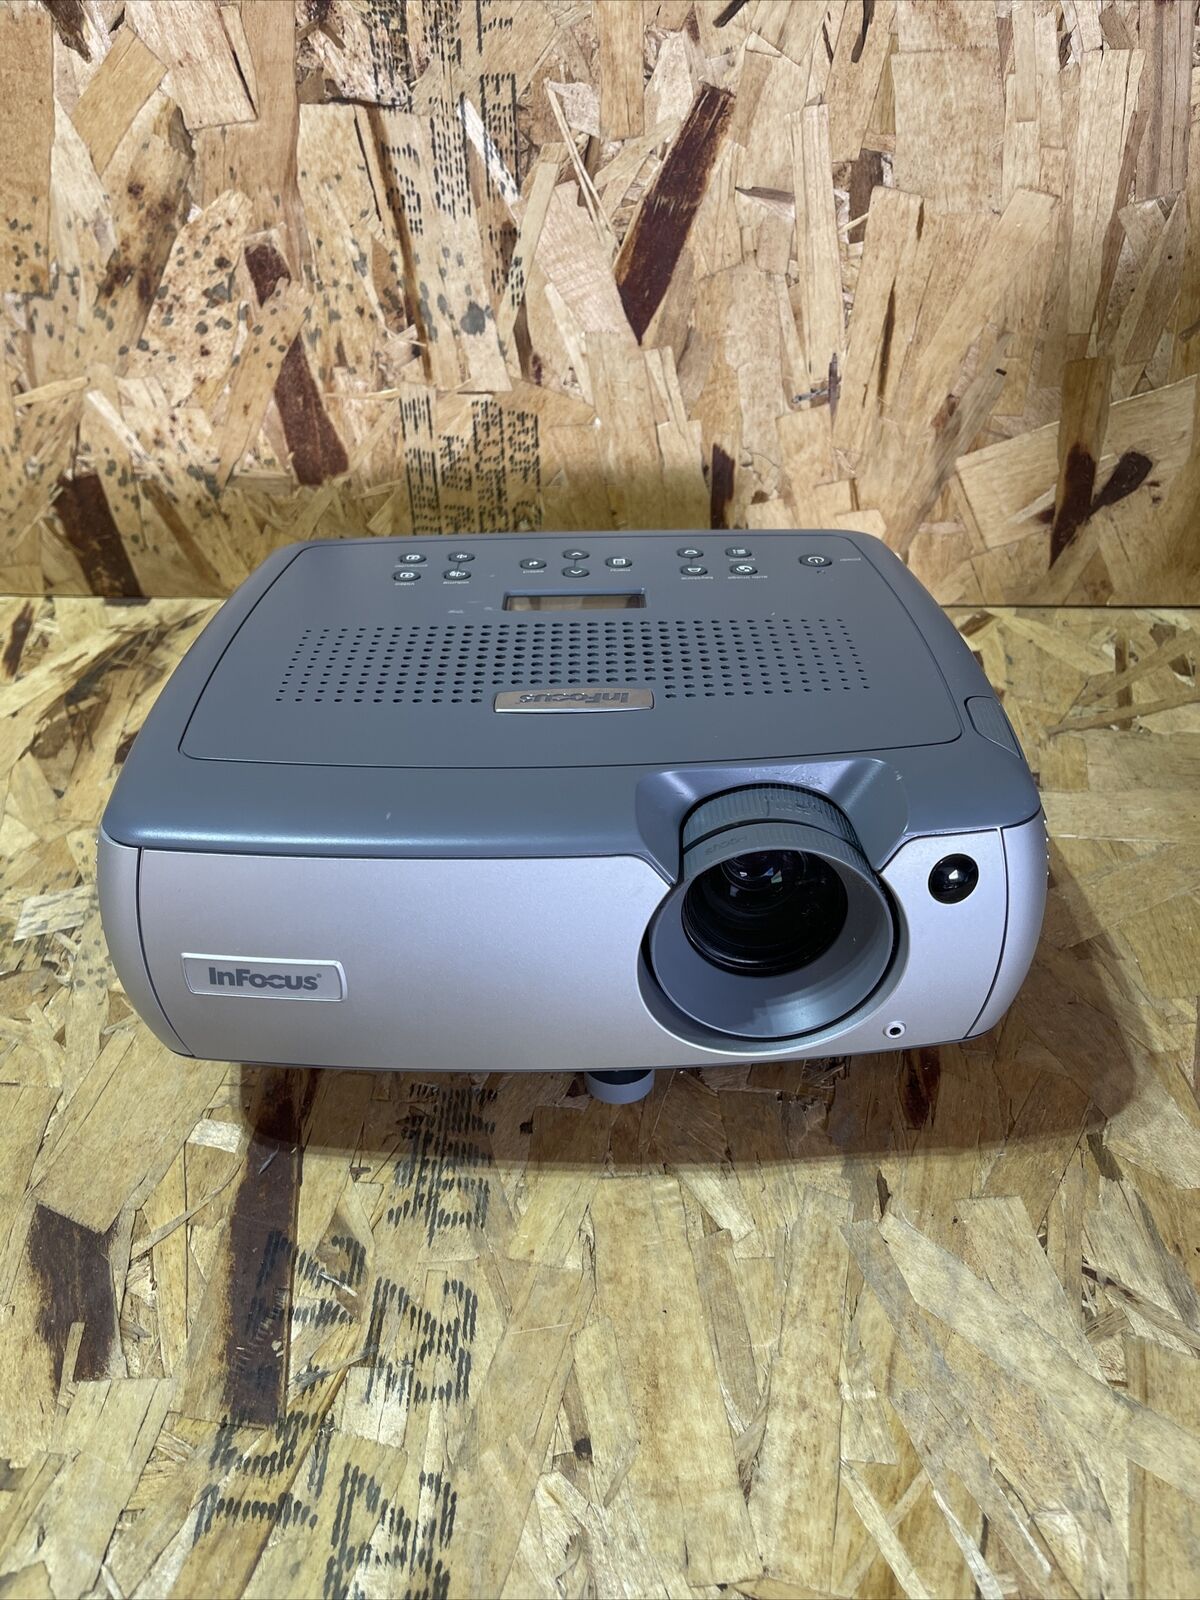 InFocus LP540 LCD Home Entertainment Projector 350 Lamp Hours w/ AC/VGA Cable